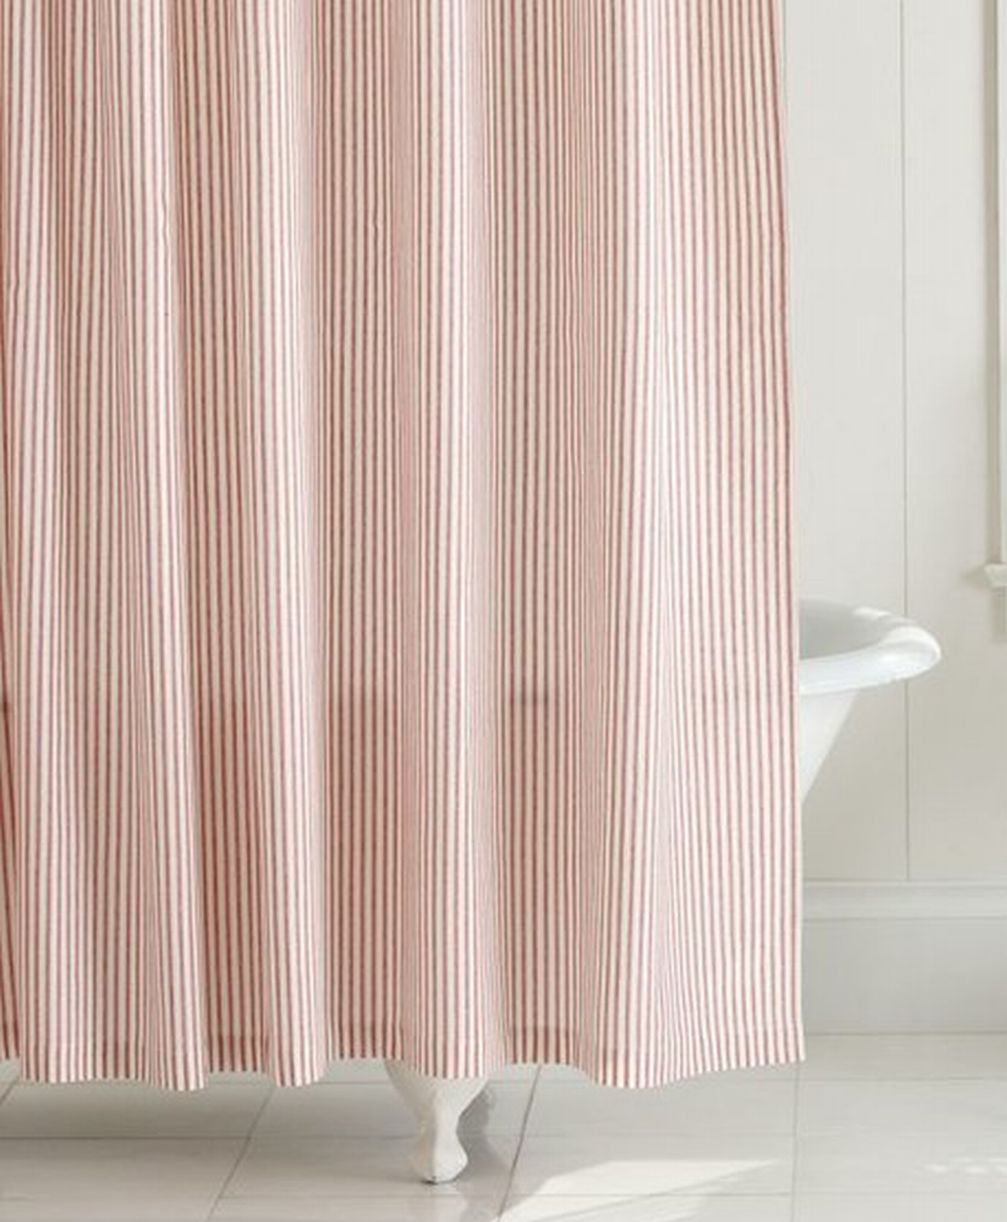 Home Classics Waffle Red Ticking Stripe, Pottery Barn Ticking Stripe Shower Curtain